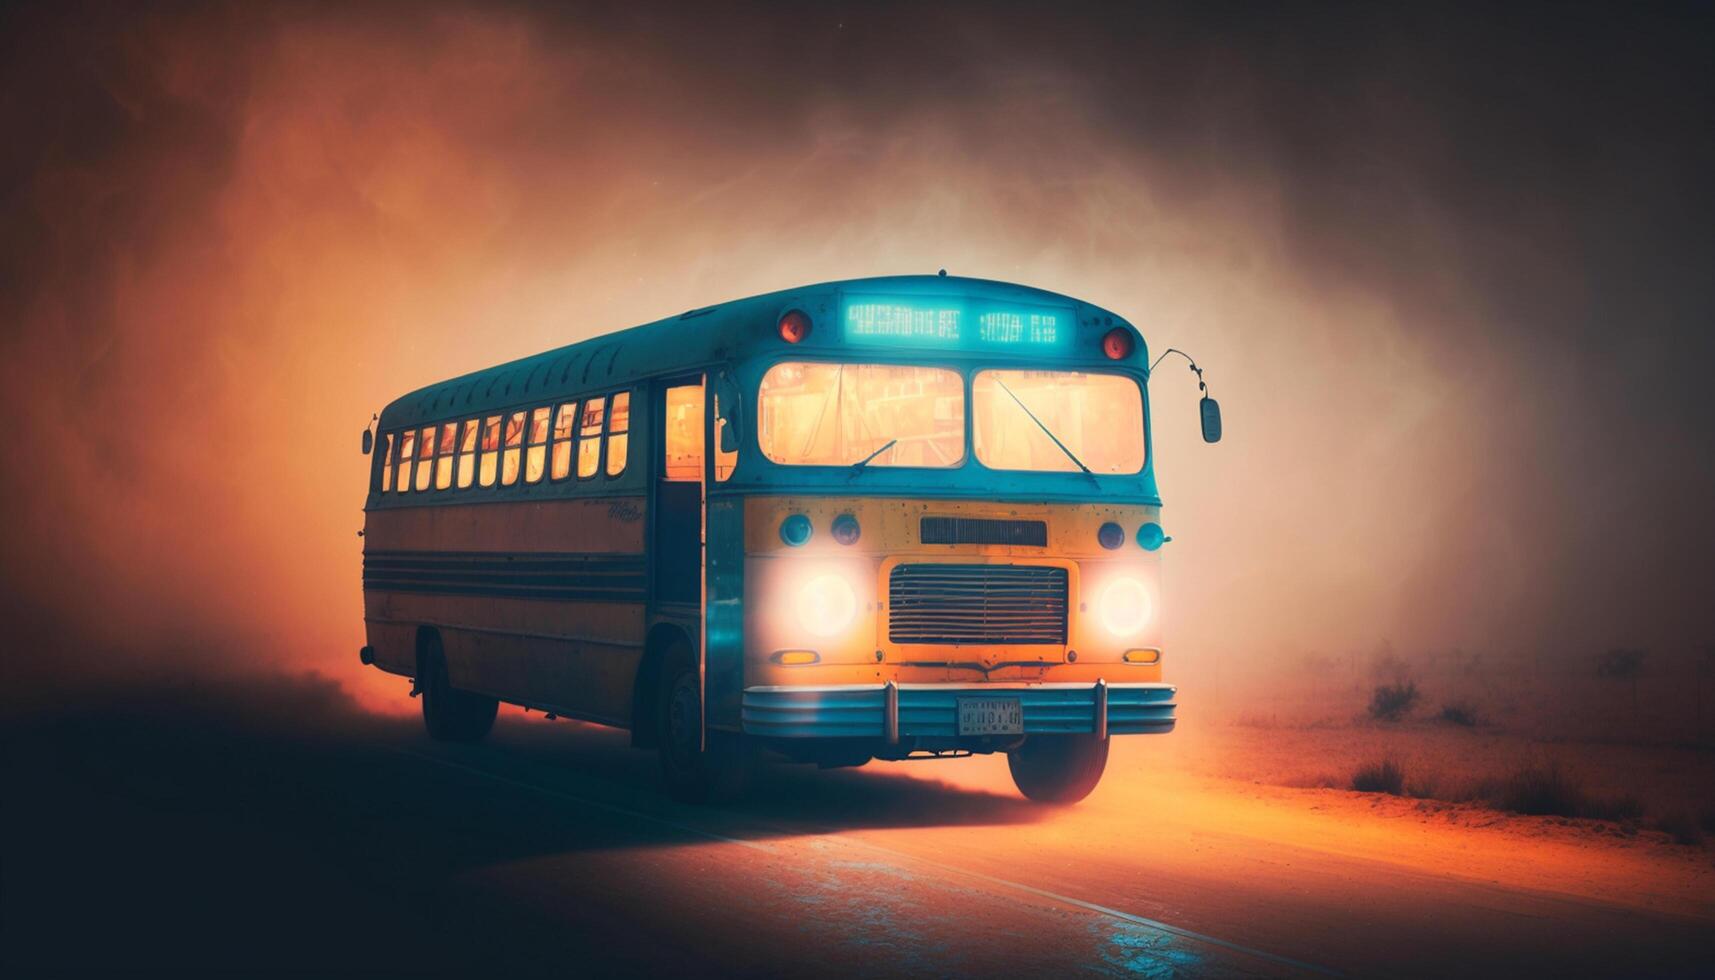 Riding into the Night 80s School Bus on a Dusty Neon Road photo